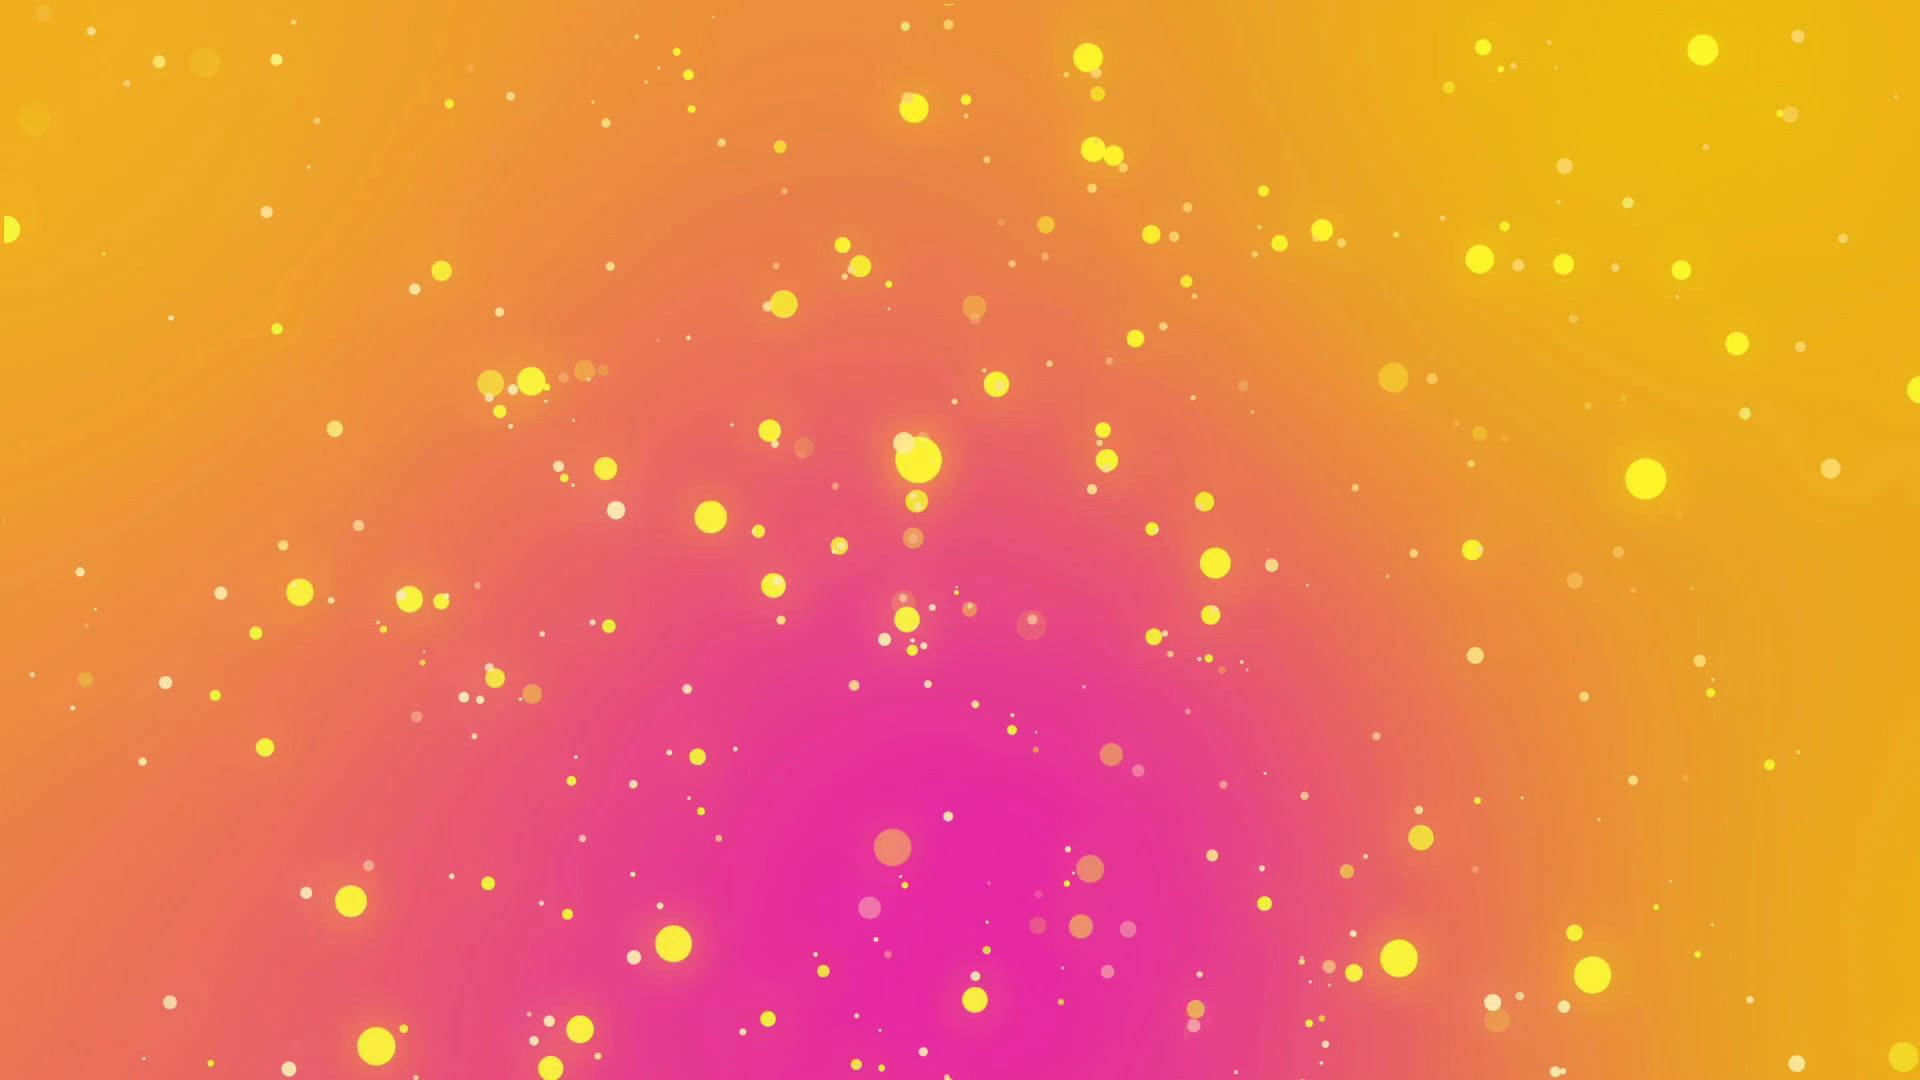 1920x1080 Romantic Christmas festive background with glowing golden yellow particles  flickering against an orange pink gradient backdrop Motion Background ...